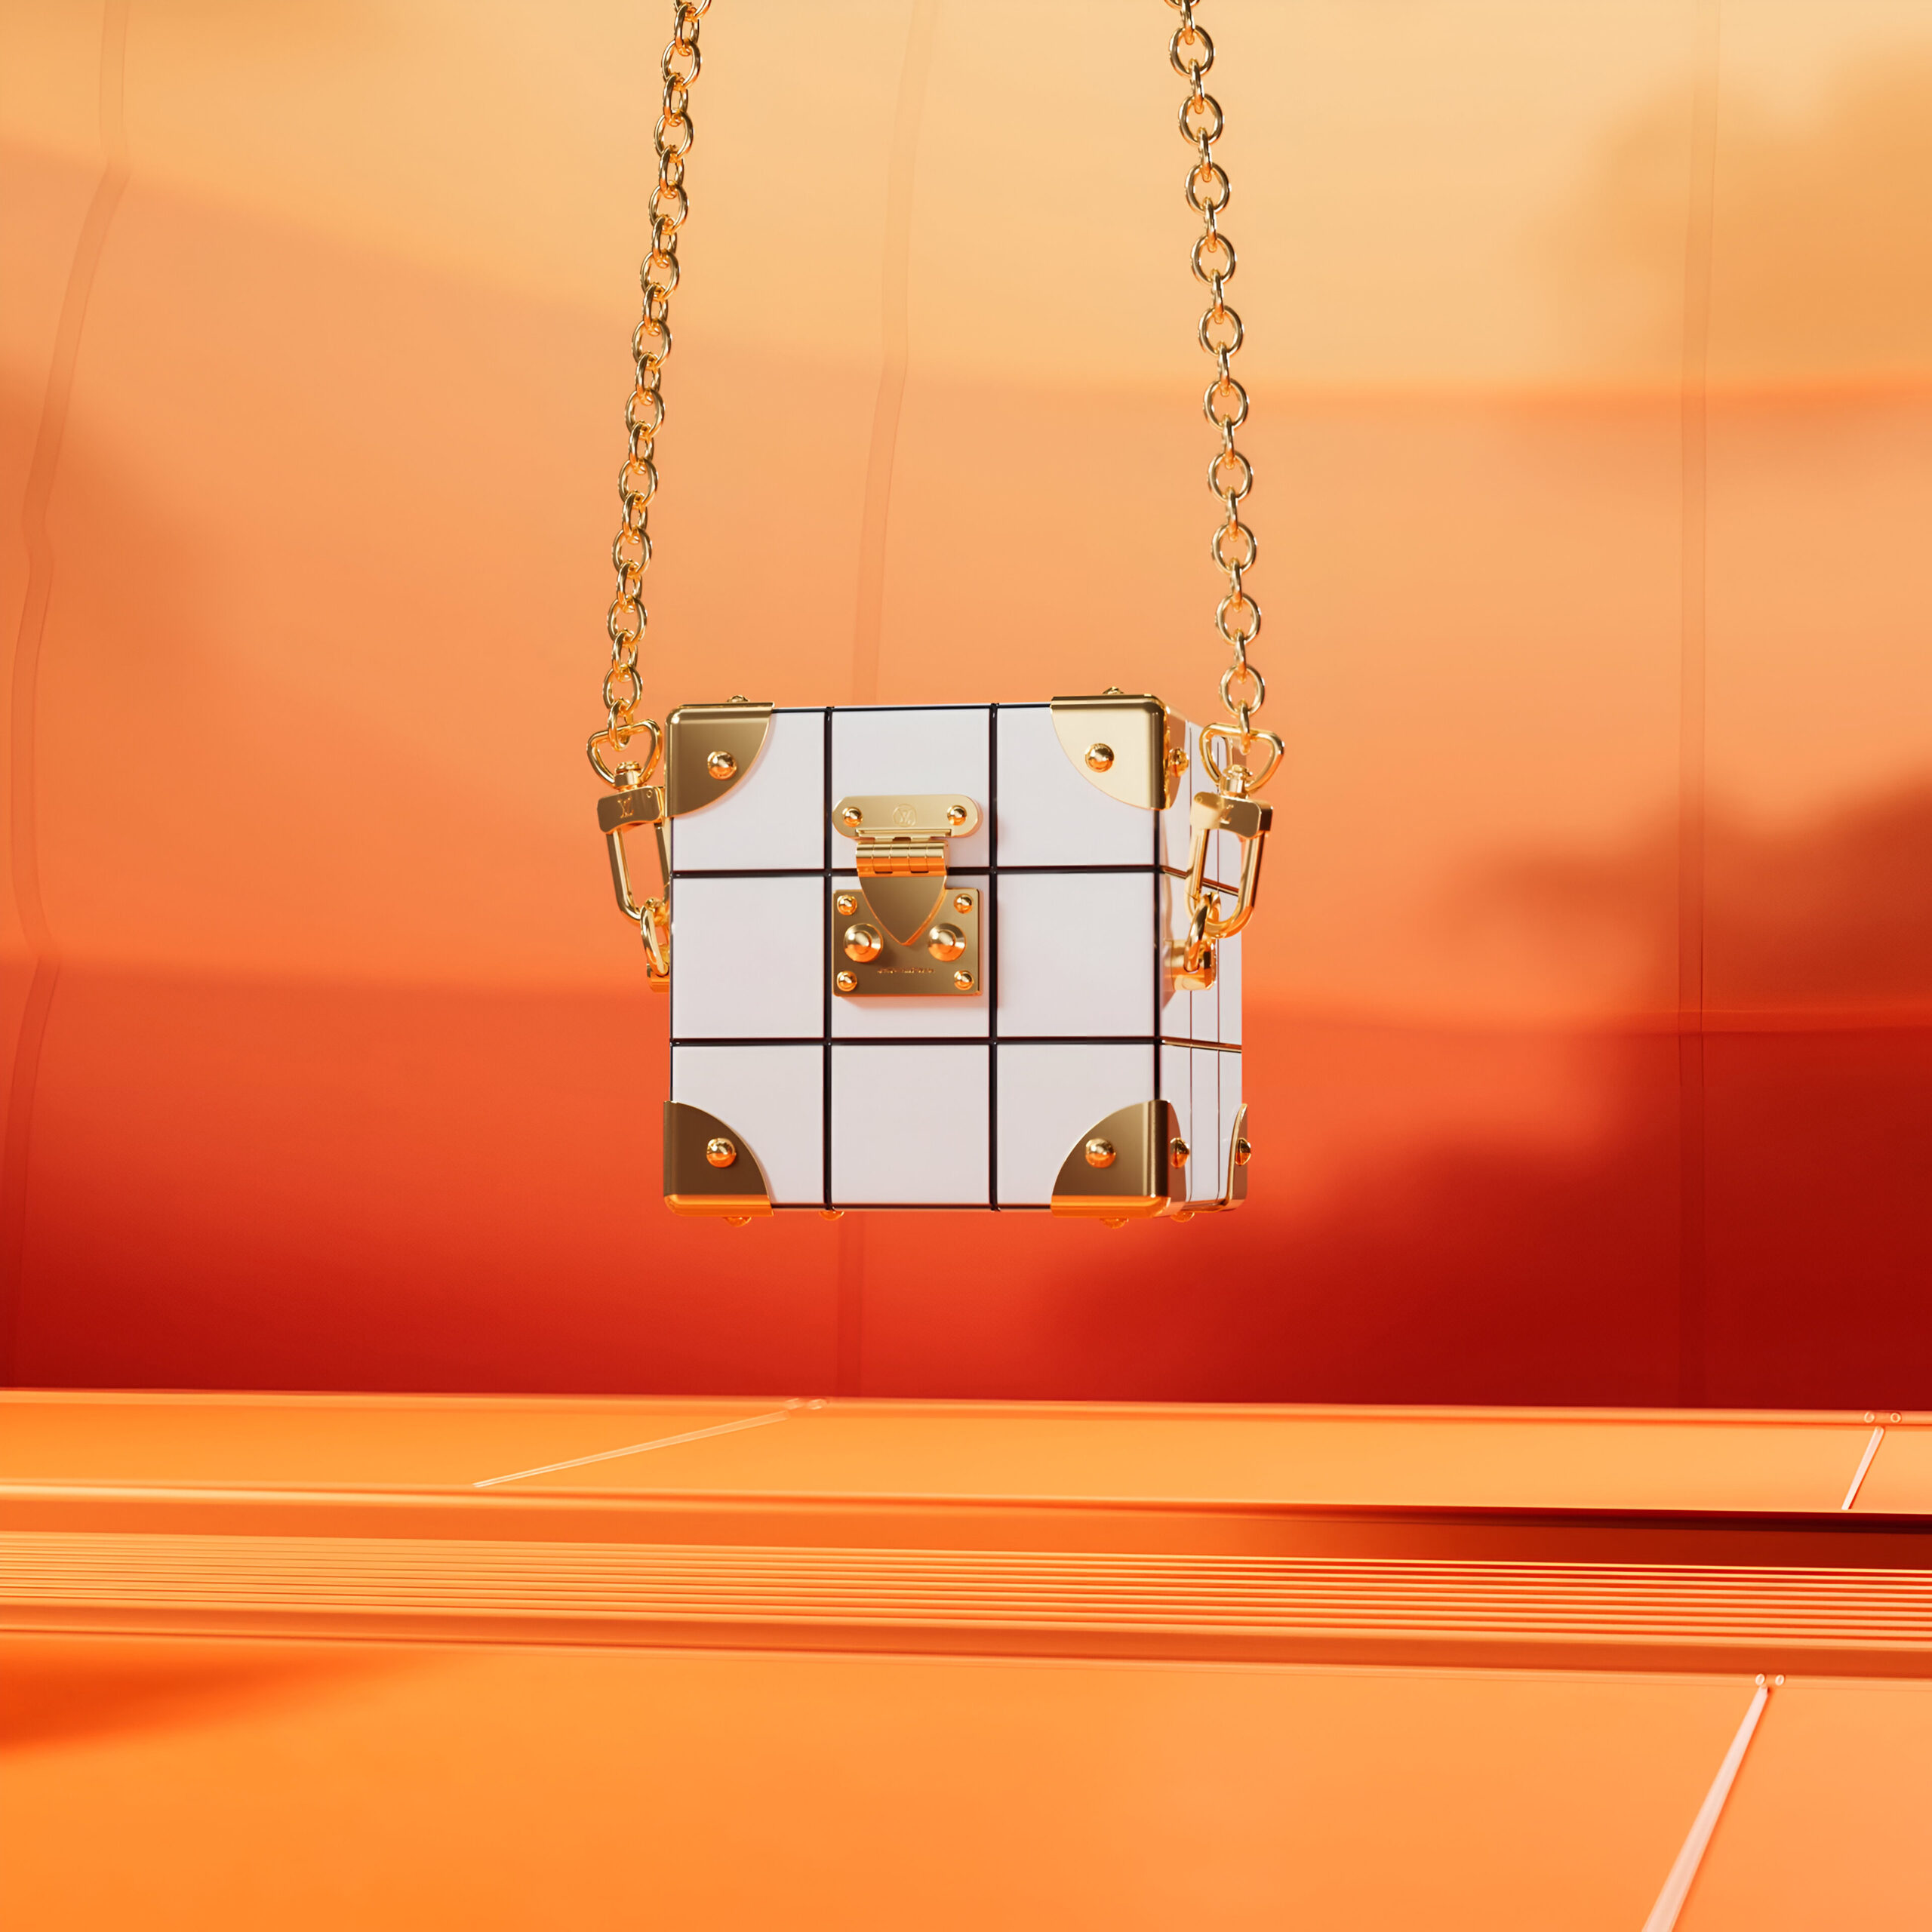 Exclusive Reveal: The VIA Tile Trunk – A Digital Icon Reserved for Louis Vuitton’s Most Loyal Aficionados